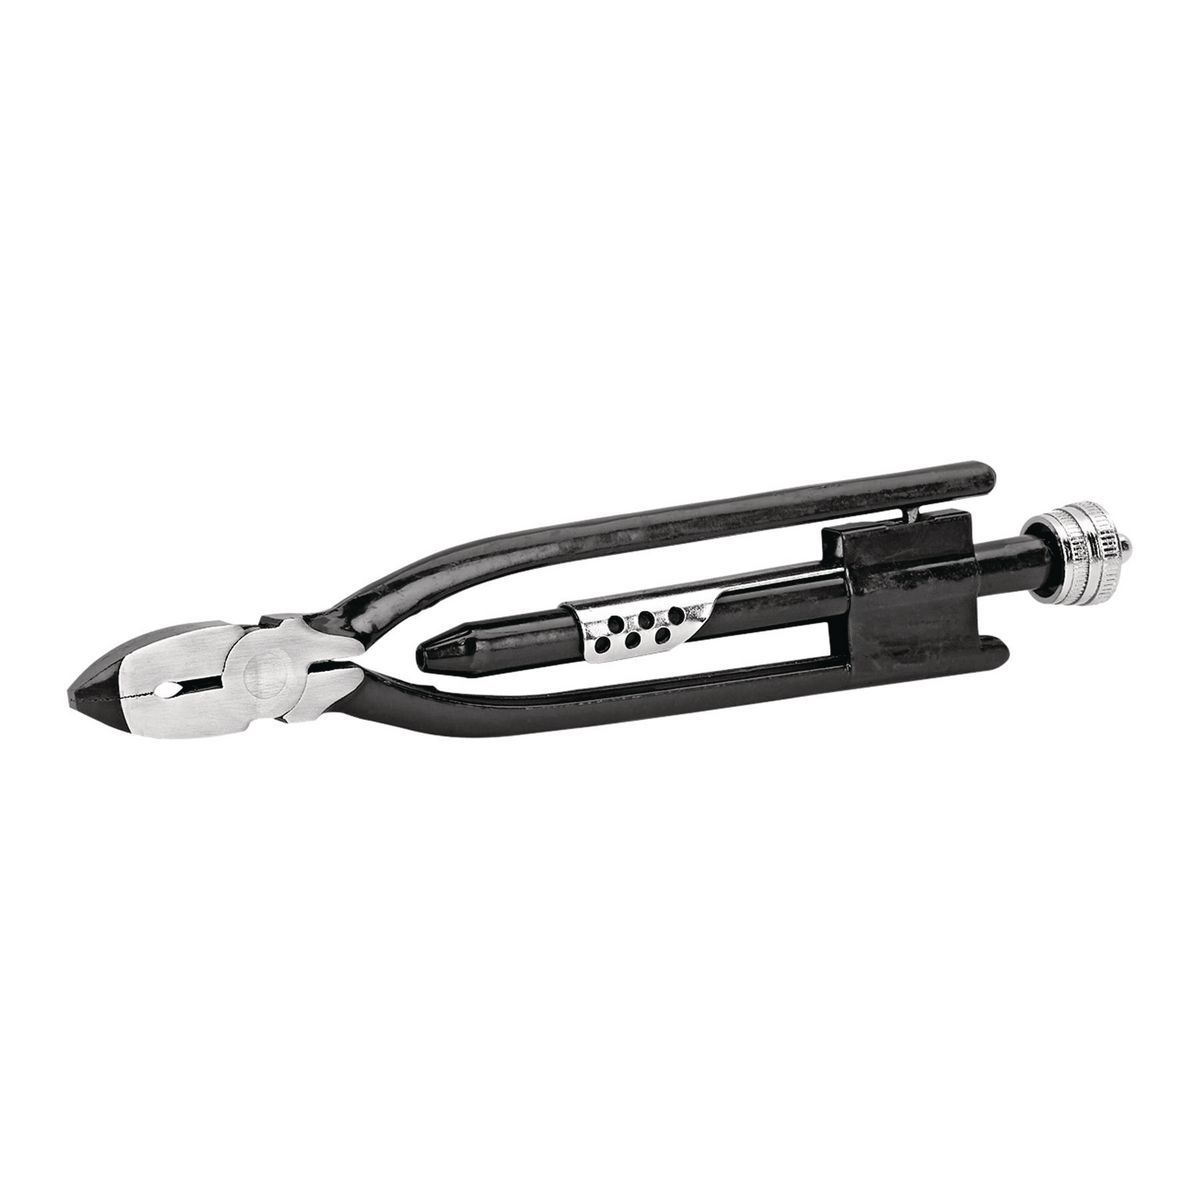 PITTSBURGH 9" Safety Wire Twisting Pliers